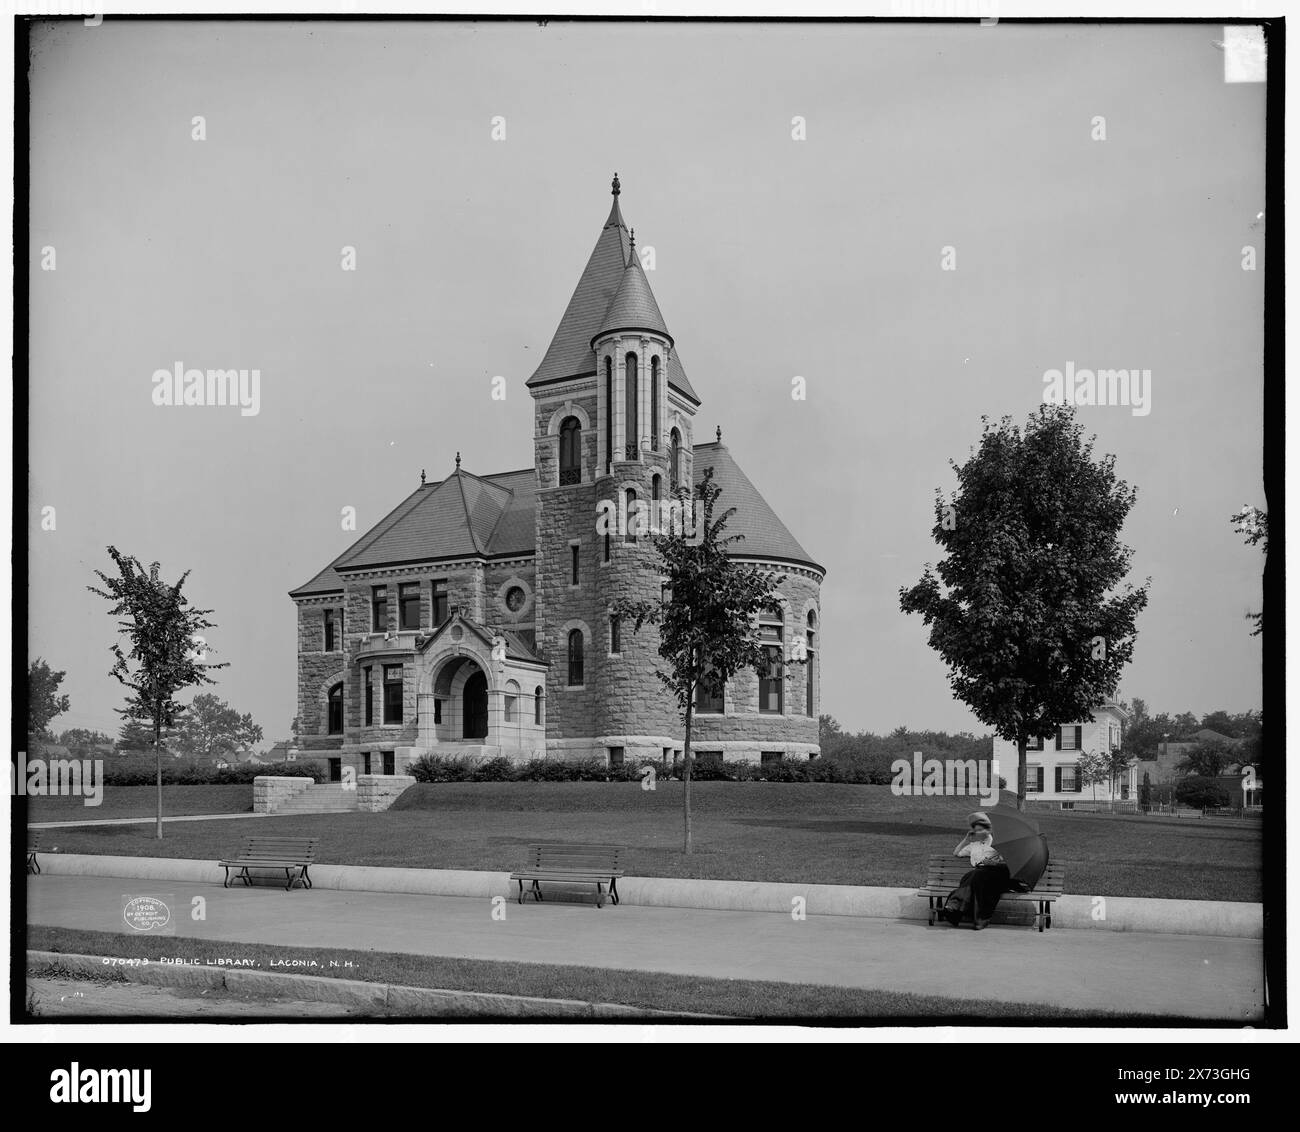 Public library, Laconia, N.H., '4403' on negative., Detroit Publishing Co. no. 070473., Gift; State Historical Society of Colorado; 1949,  Libraries. , United States, New Hampshire, Laconia. Stock Photo